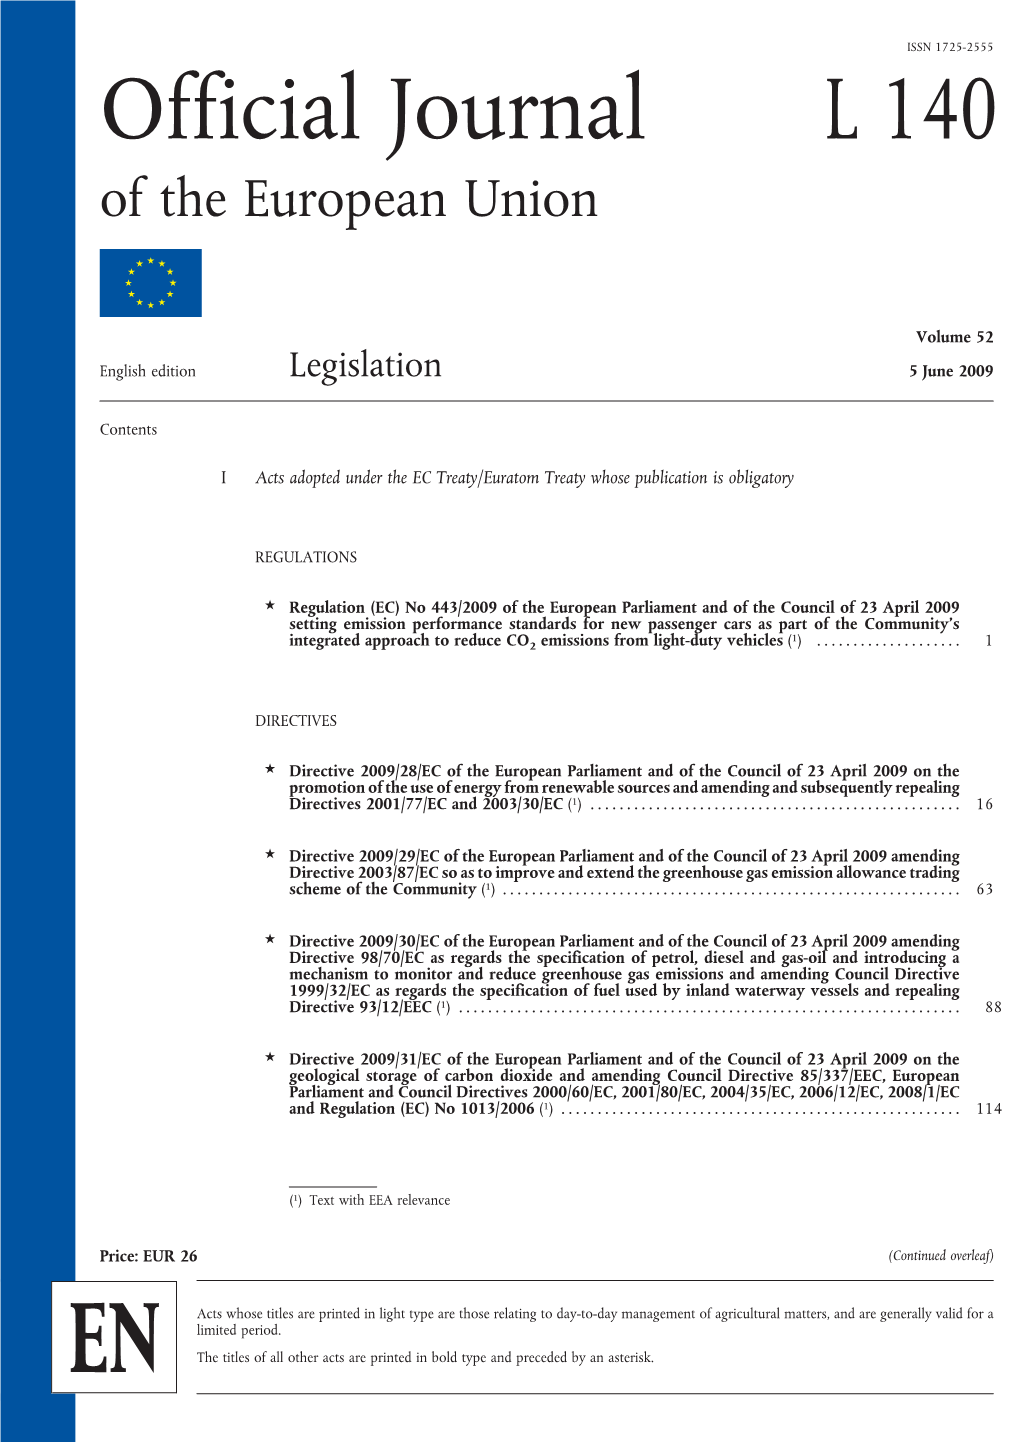 Official Journal L 140 of the European Union